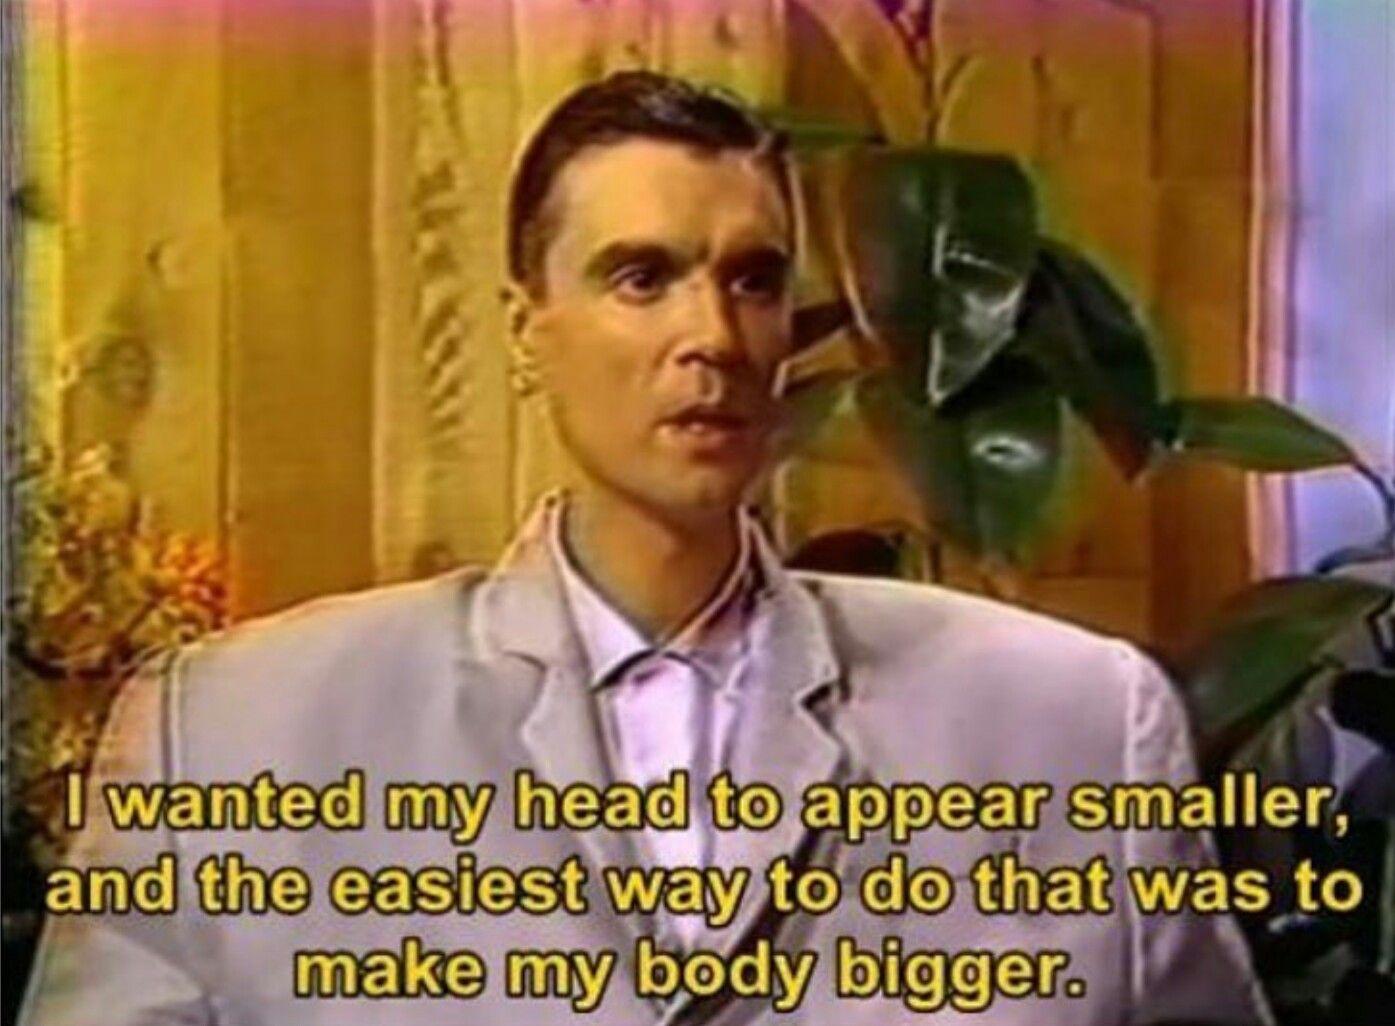 david byrne blackface - I wanted my head to appear smaller, and the easiest way to do that was to make my body bigger.